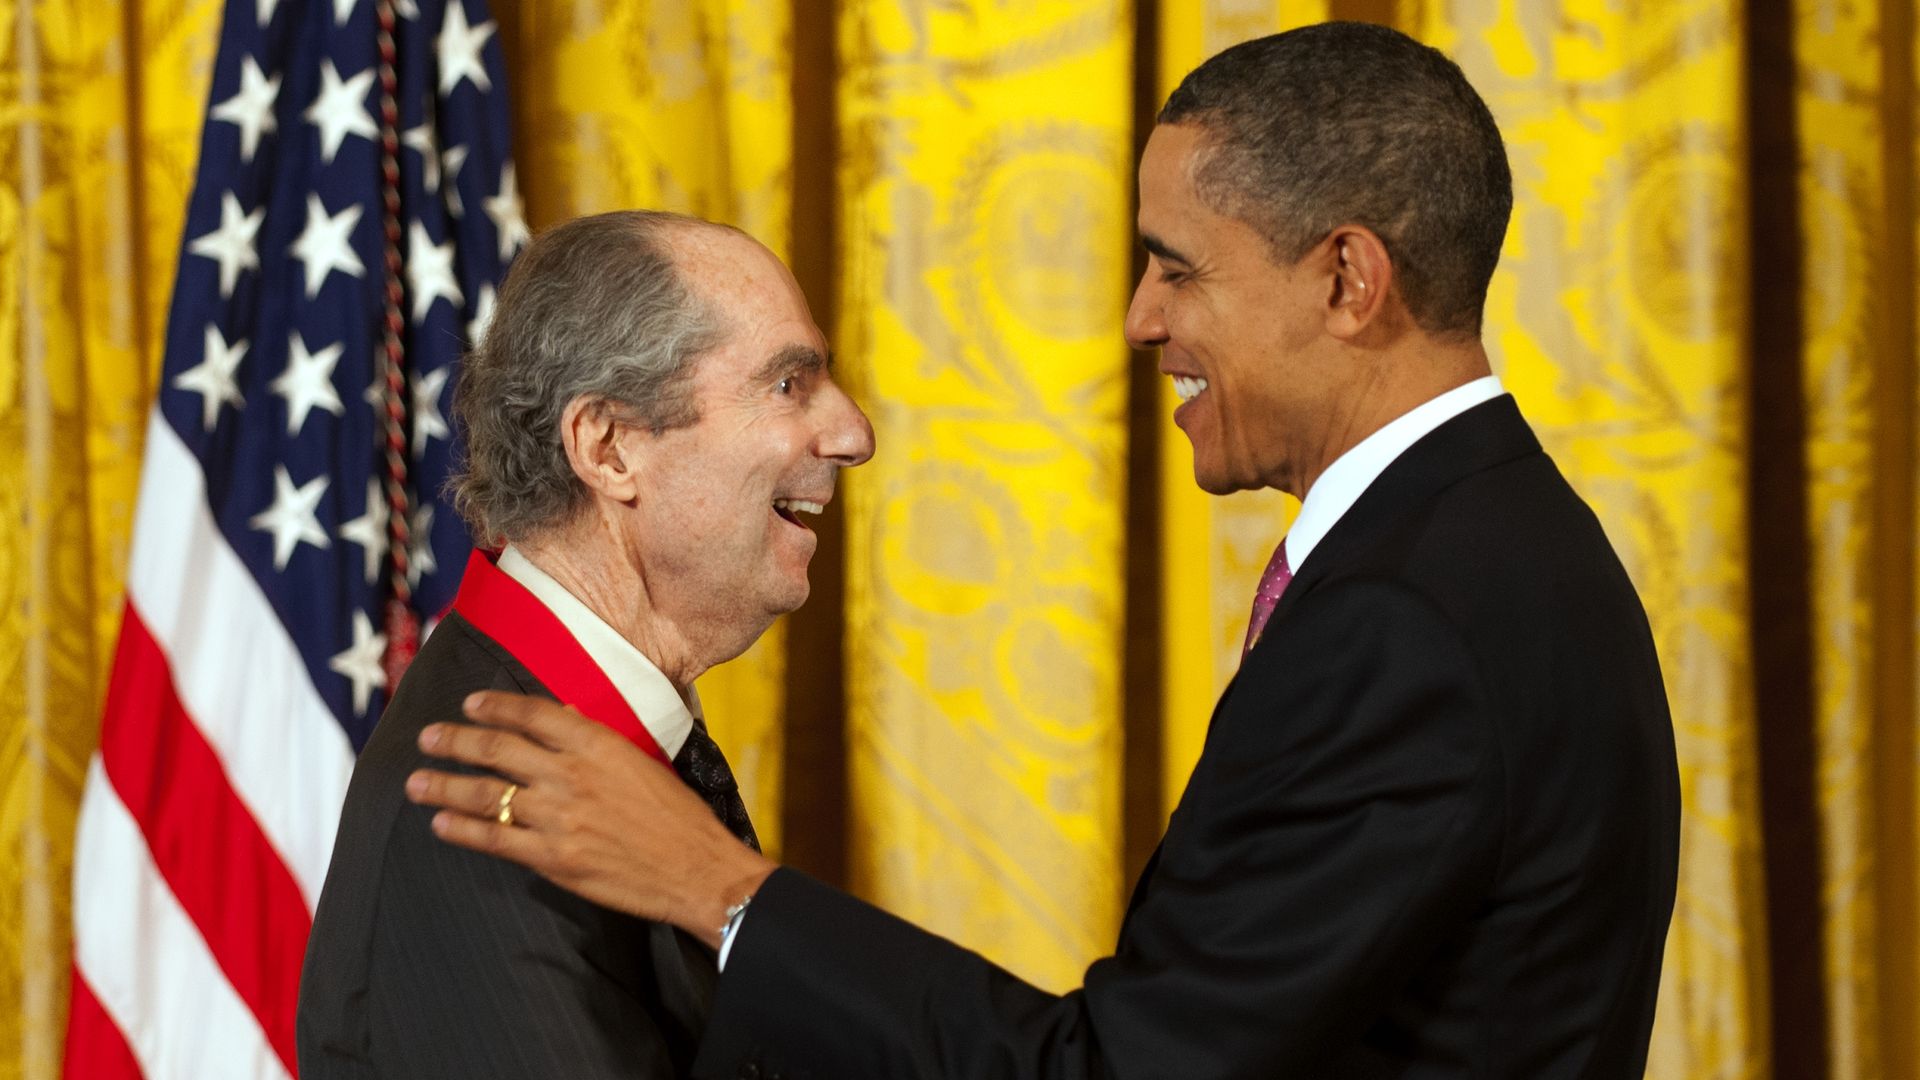 Obama places his hands on Roth's shoulders